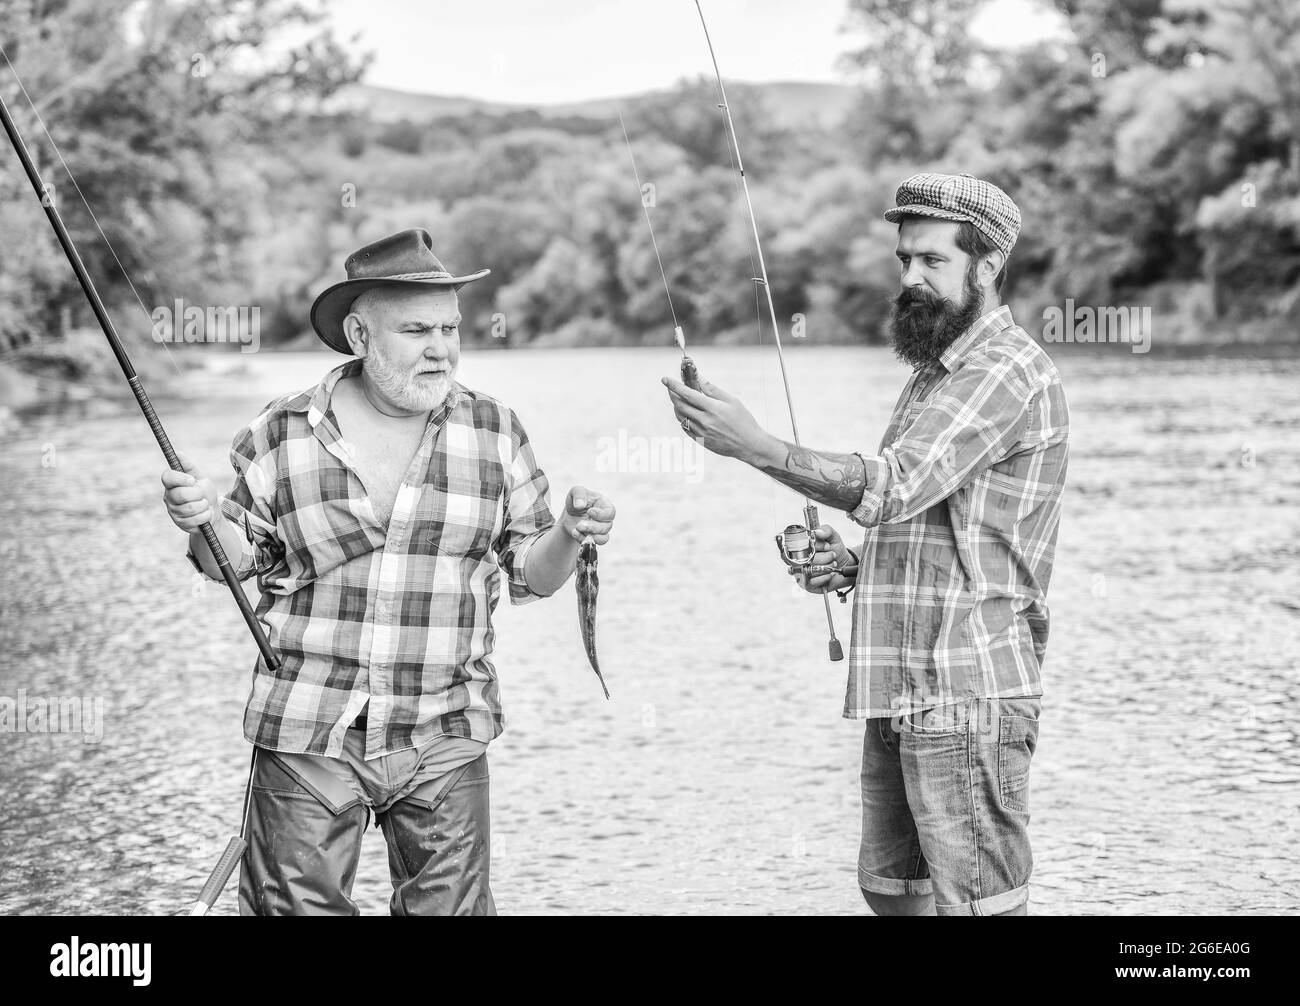 Fisherman reel Black and White Stock Photos & Images - Page 3 - Alamy